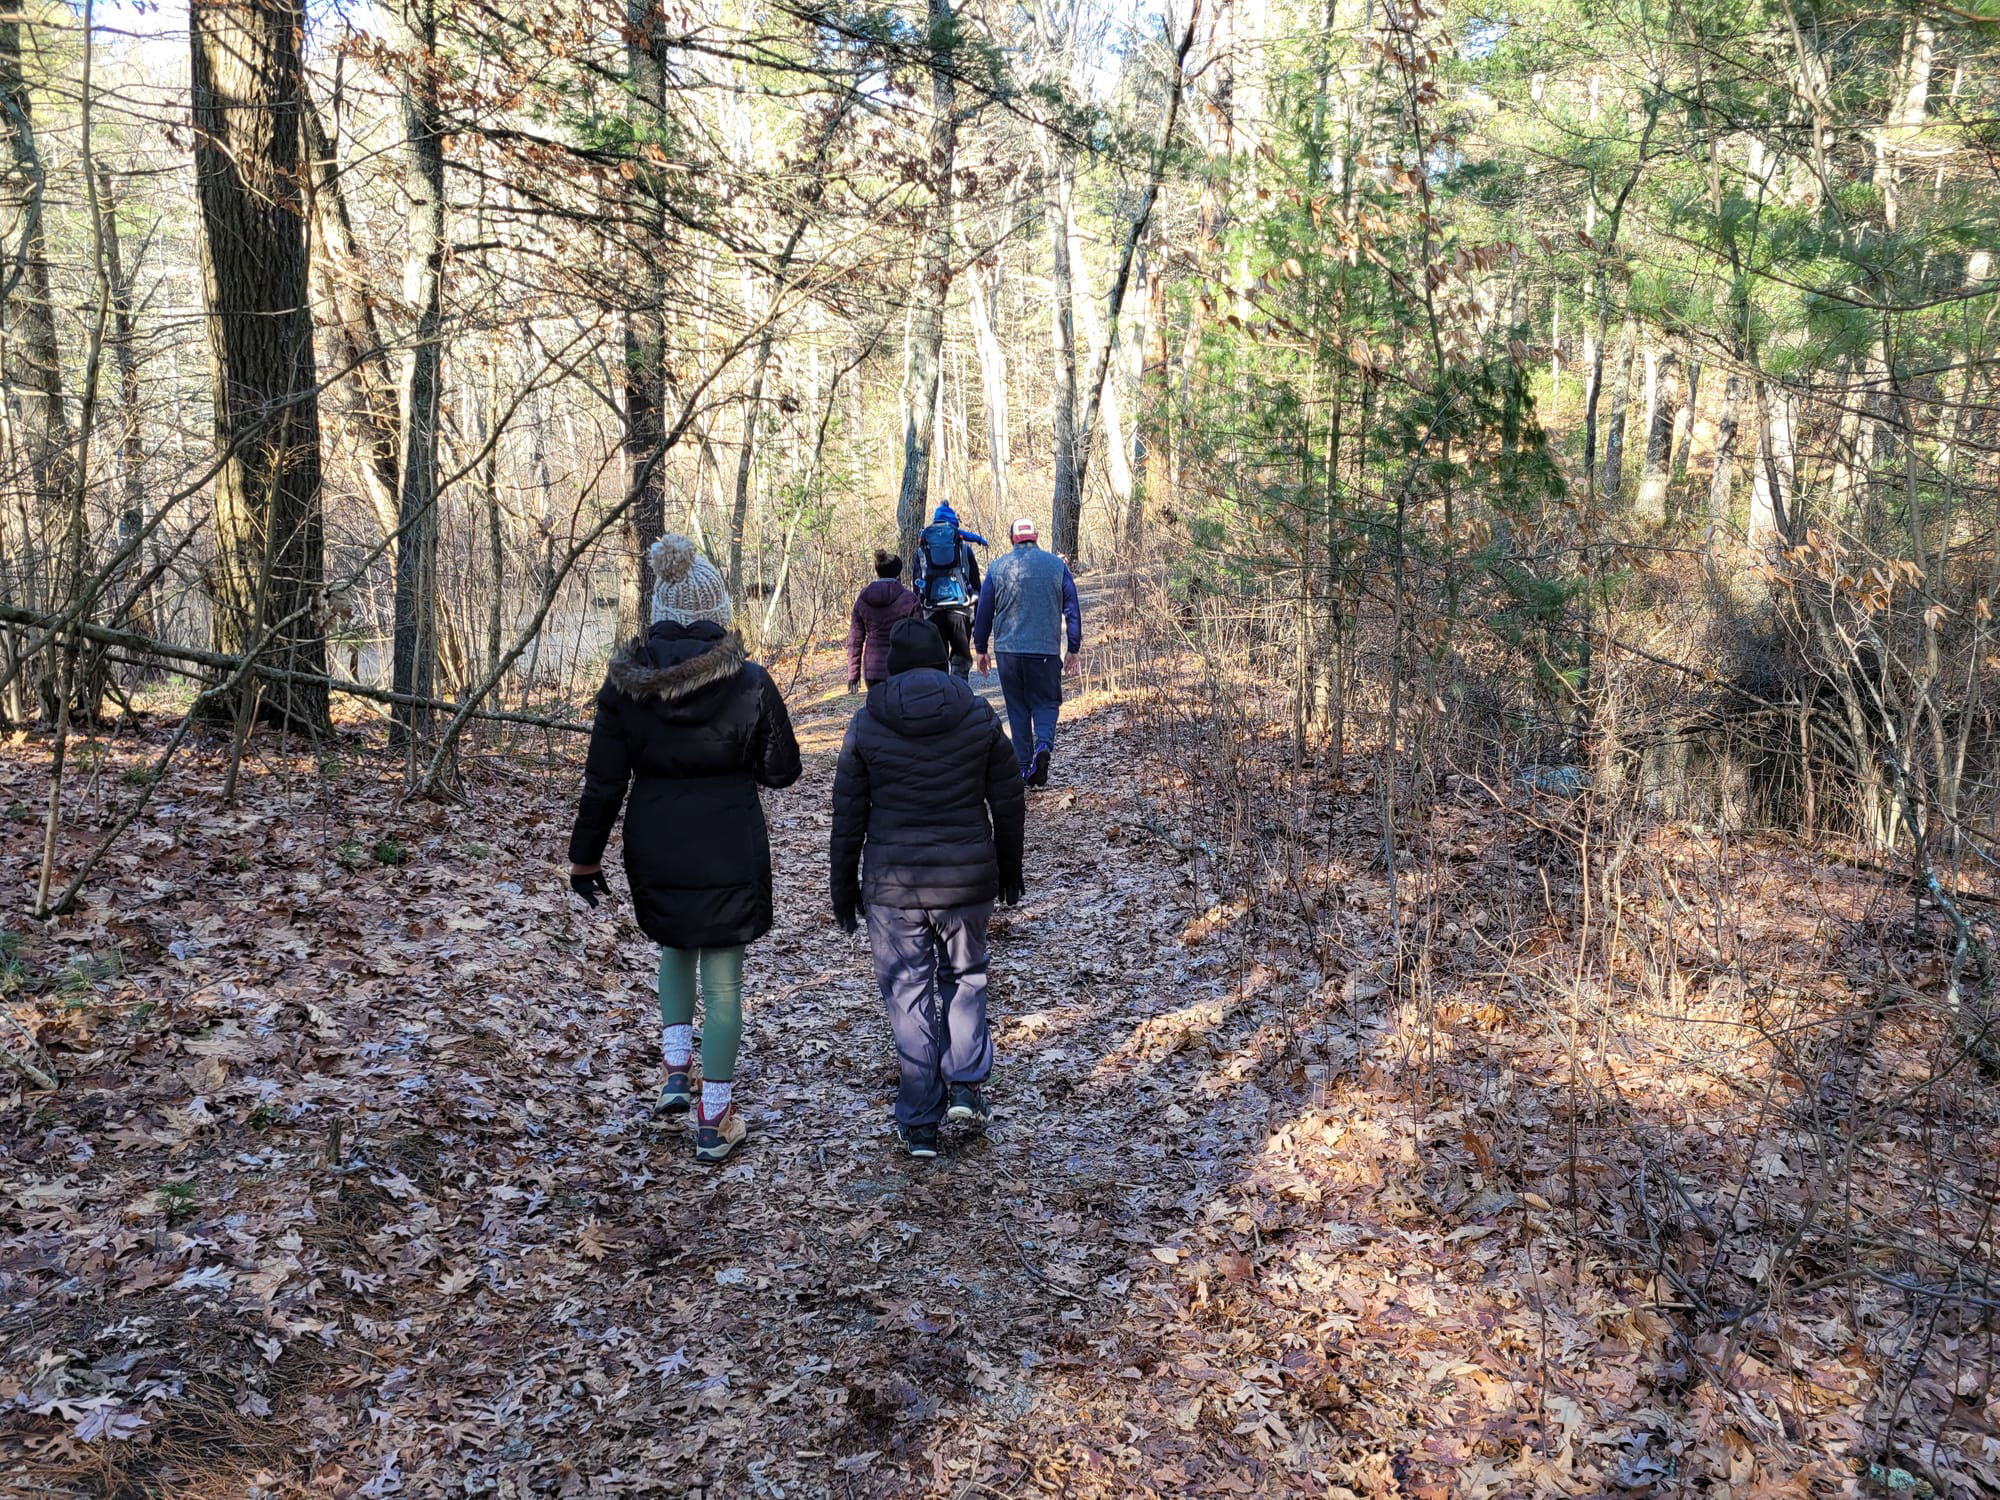 Noanet Woodlands Hiking Trails (Dover, MA)